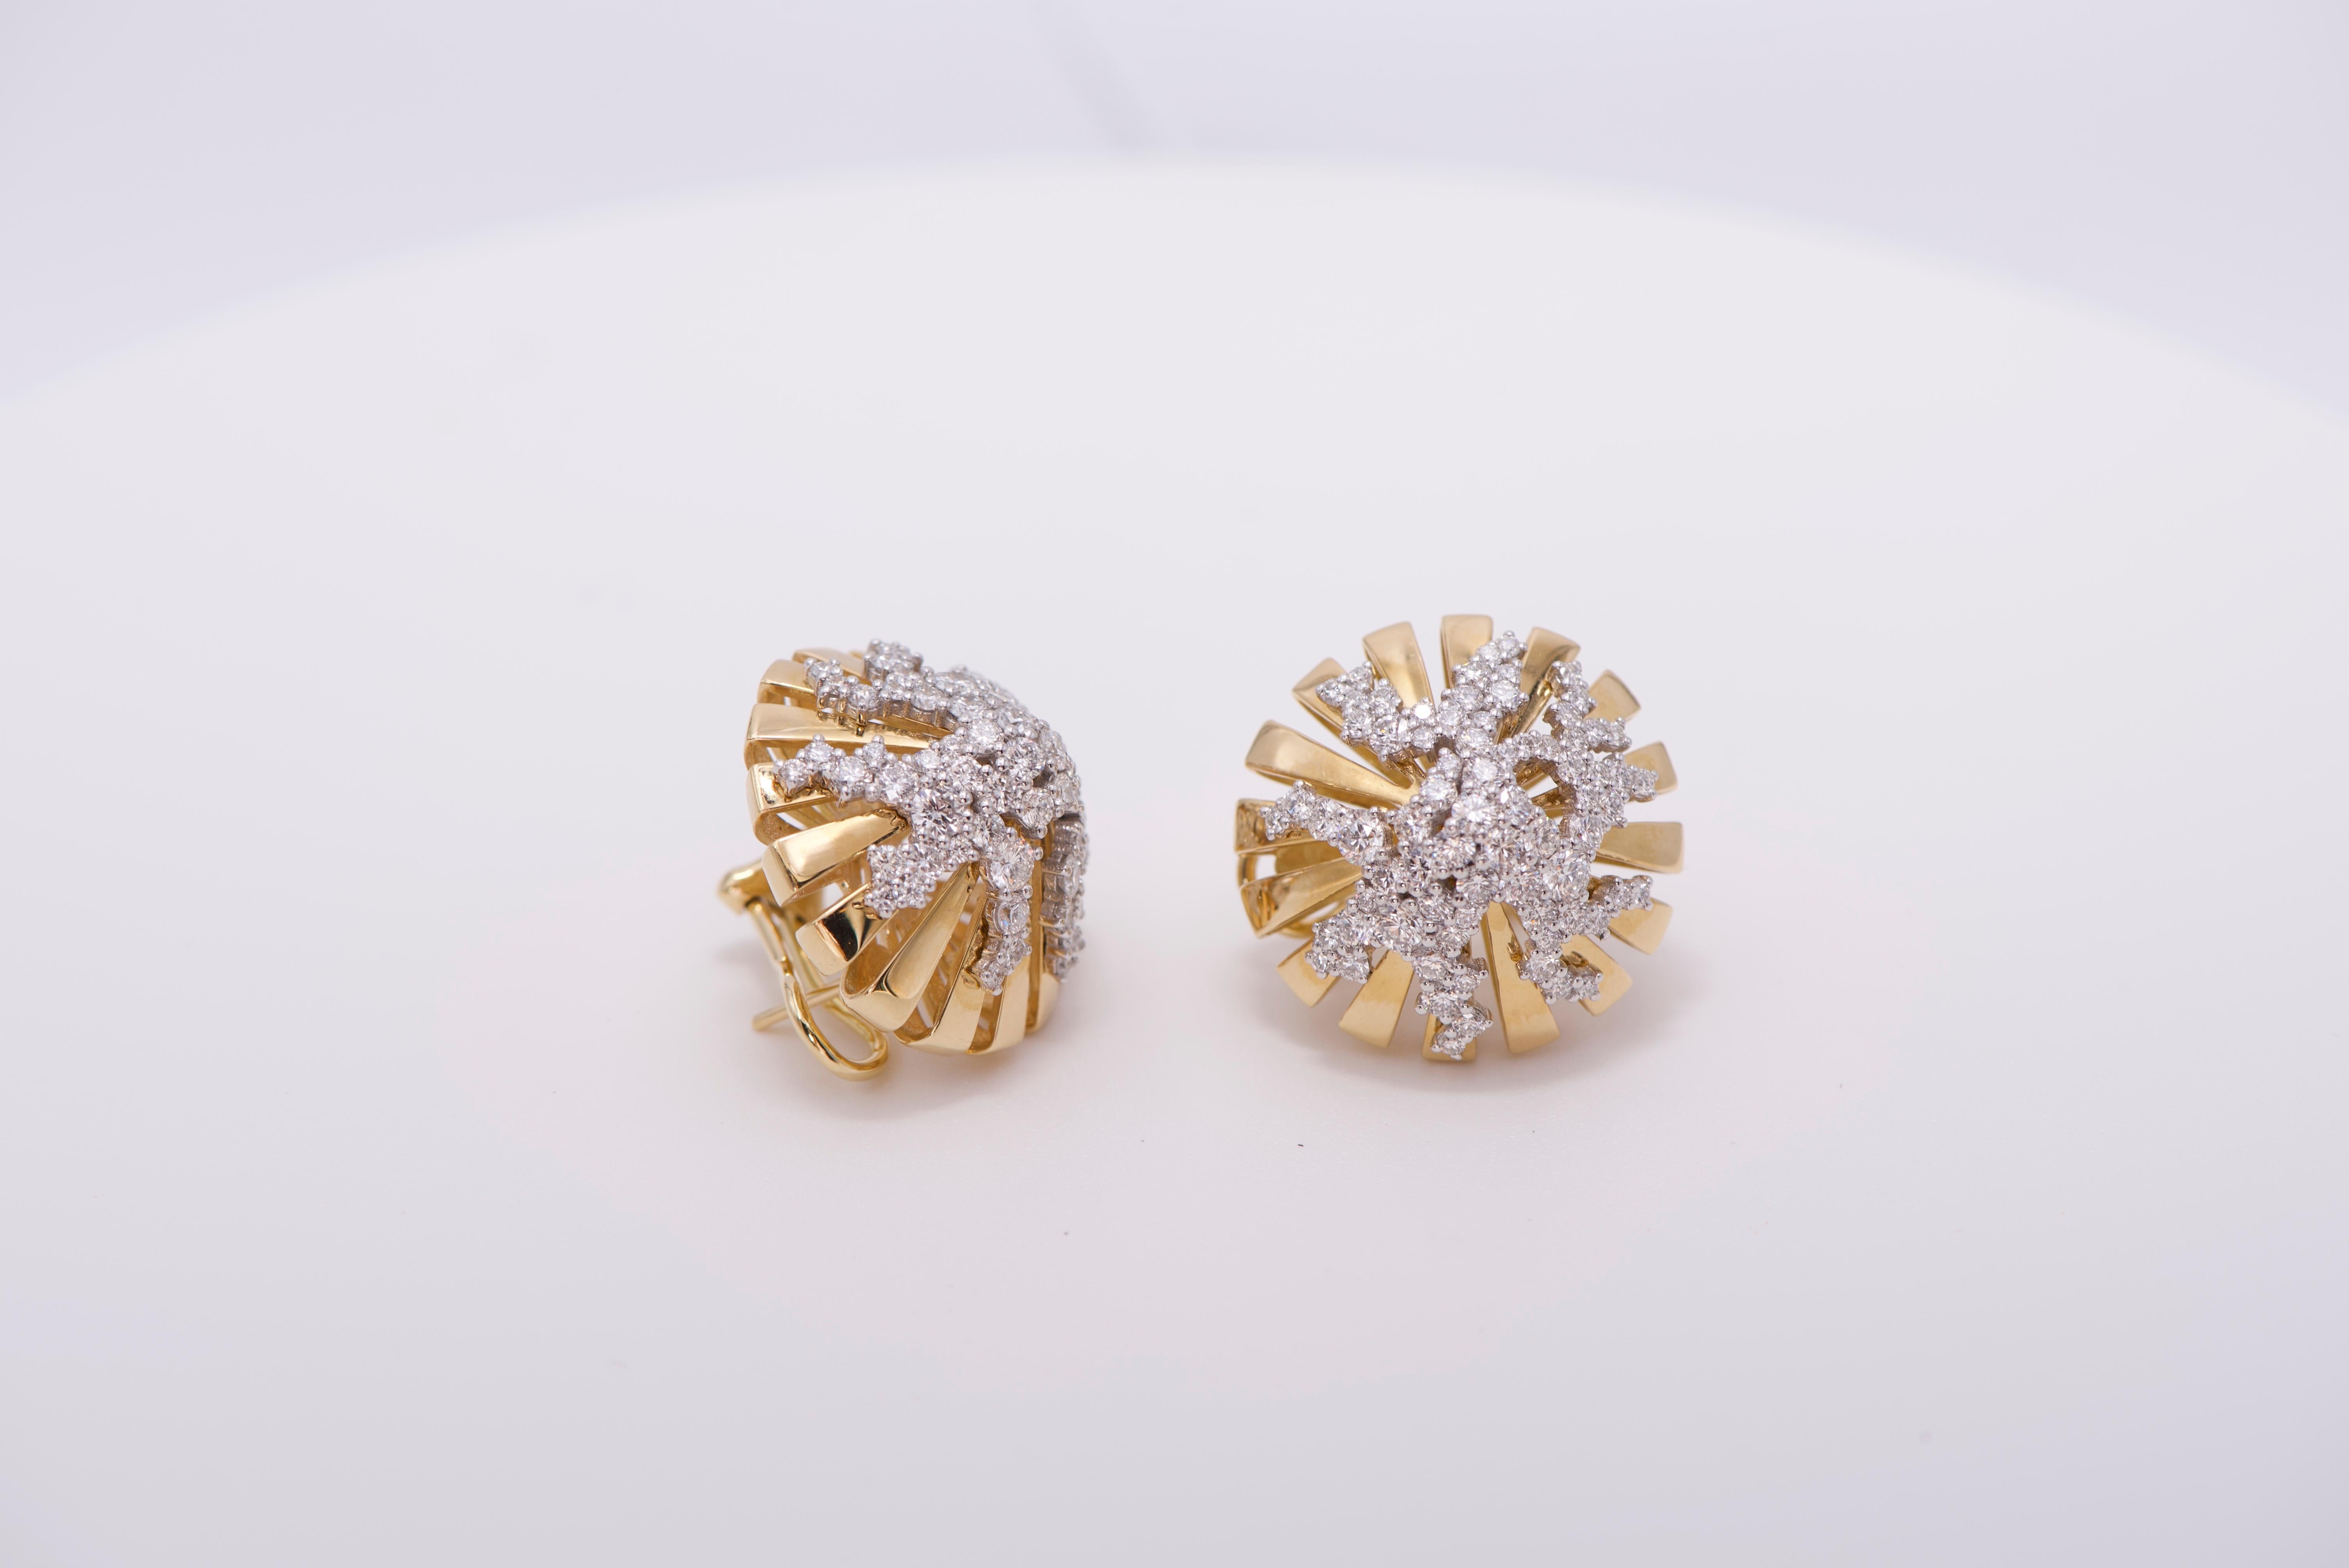 Earrings in 18K yellow gold with cluster of white diamonds (approx. 4.78 carats) set in 18K white gold. These earrings are from Miseno's Vesuvio collection which is inspired by Mount Vesuvius located on the Gulf of Naples. The shape of these